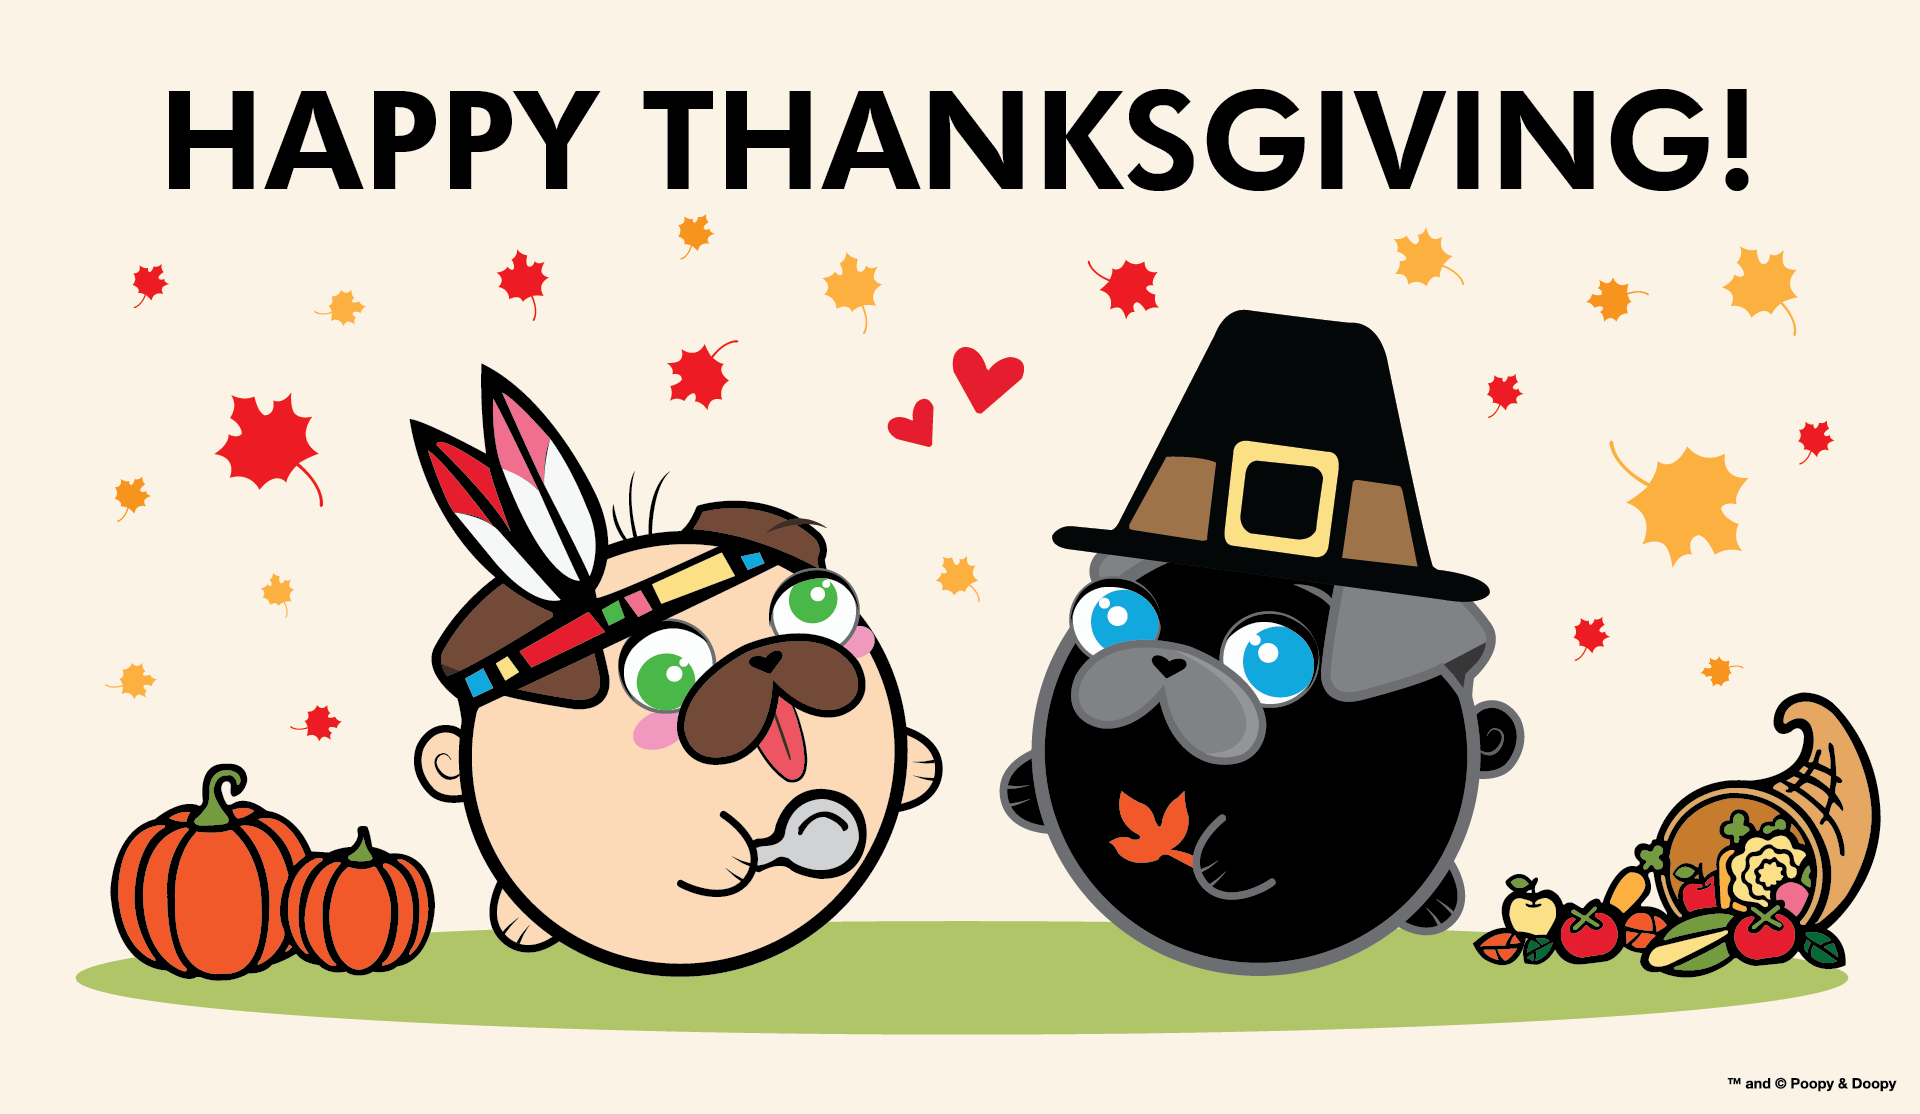 Poopy and Doopy - Thanksgiving